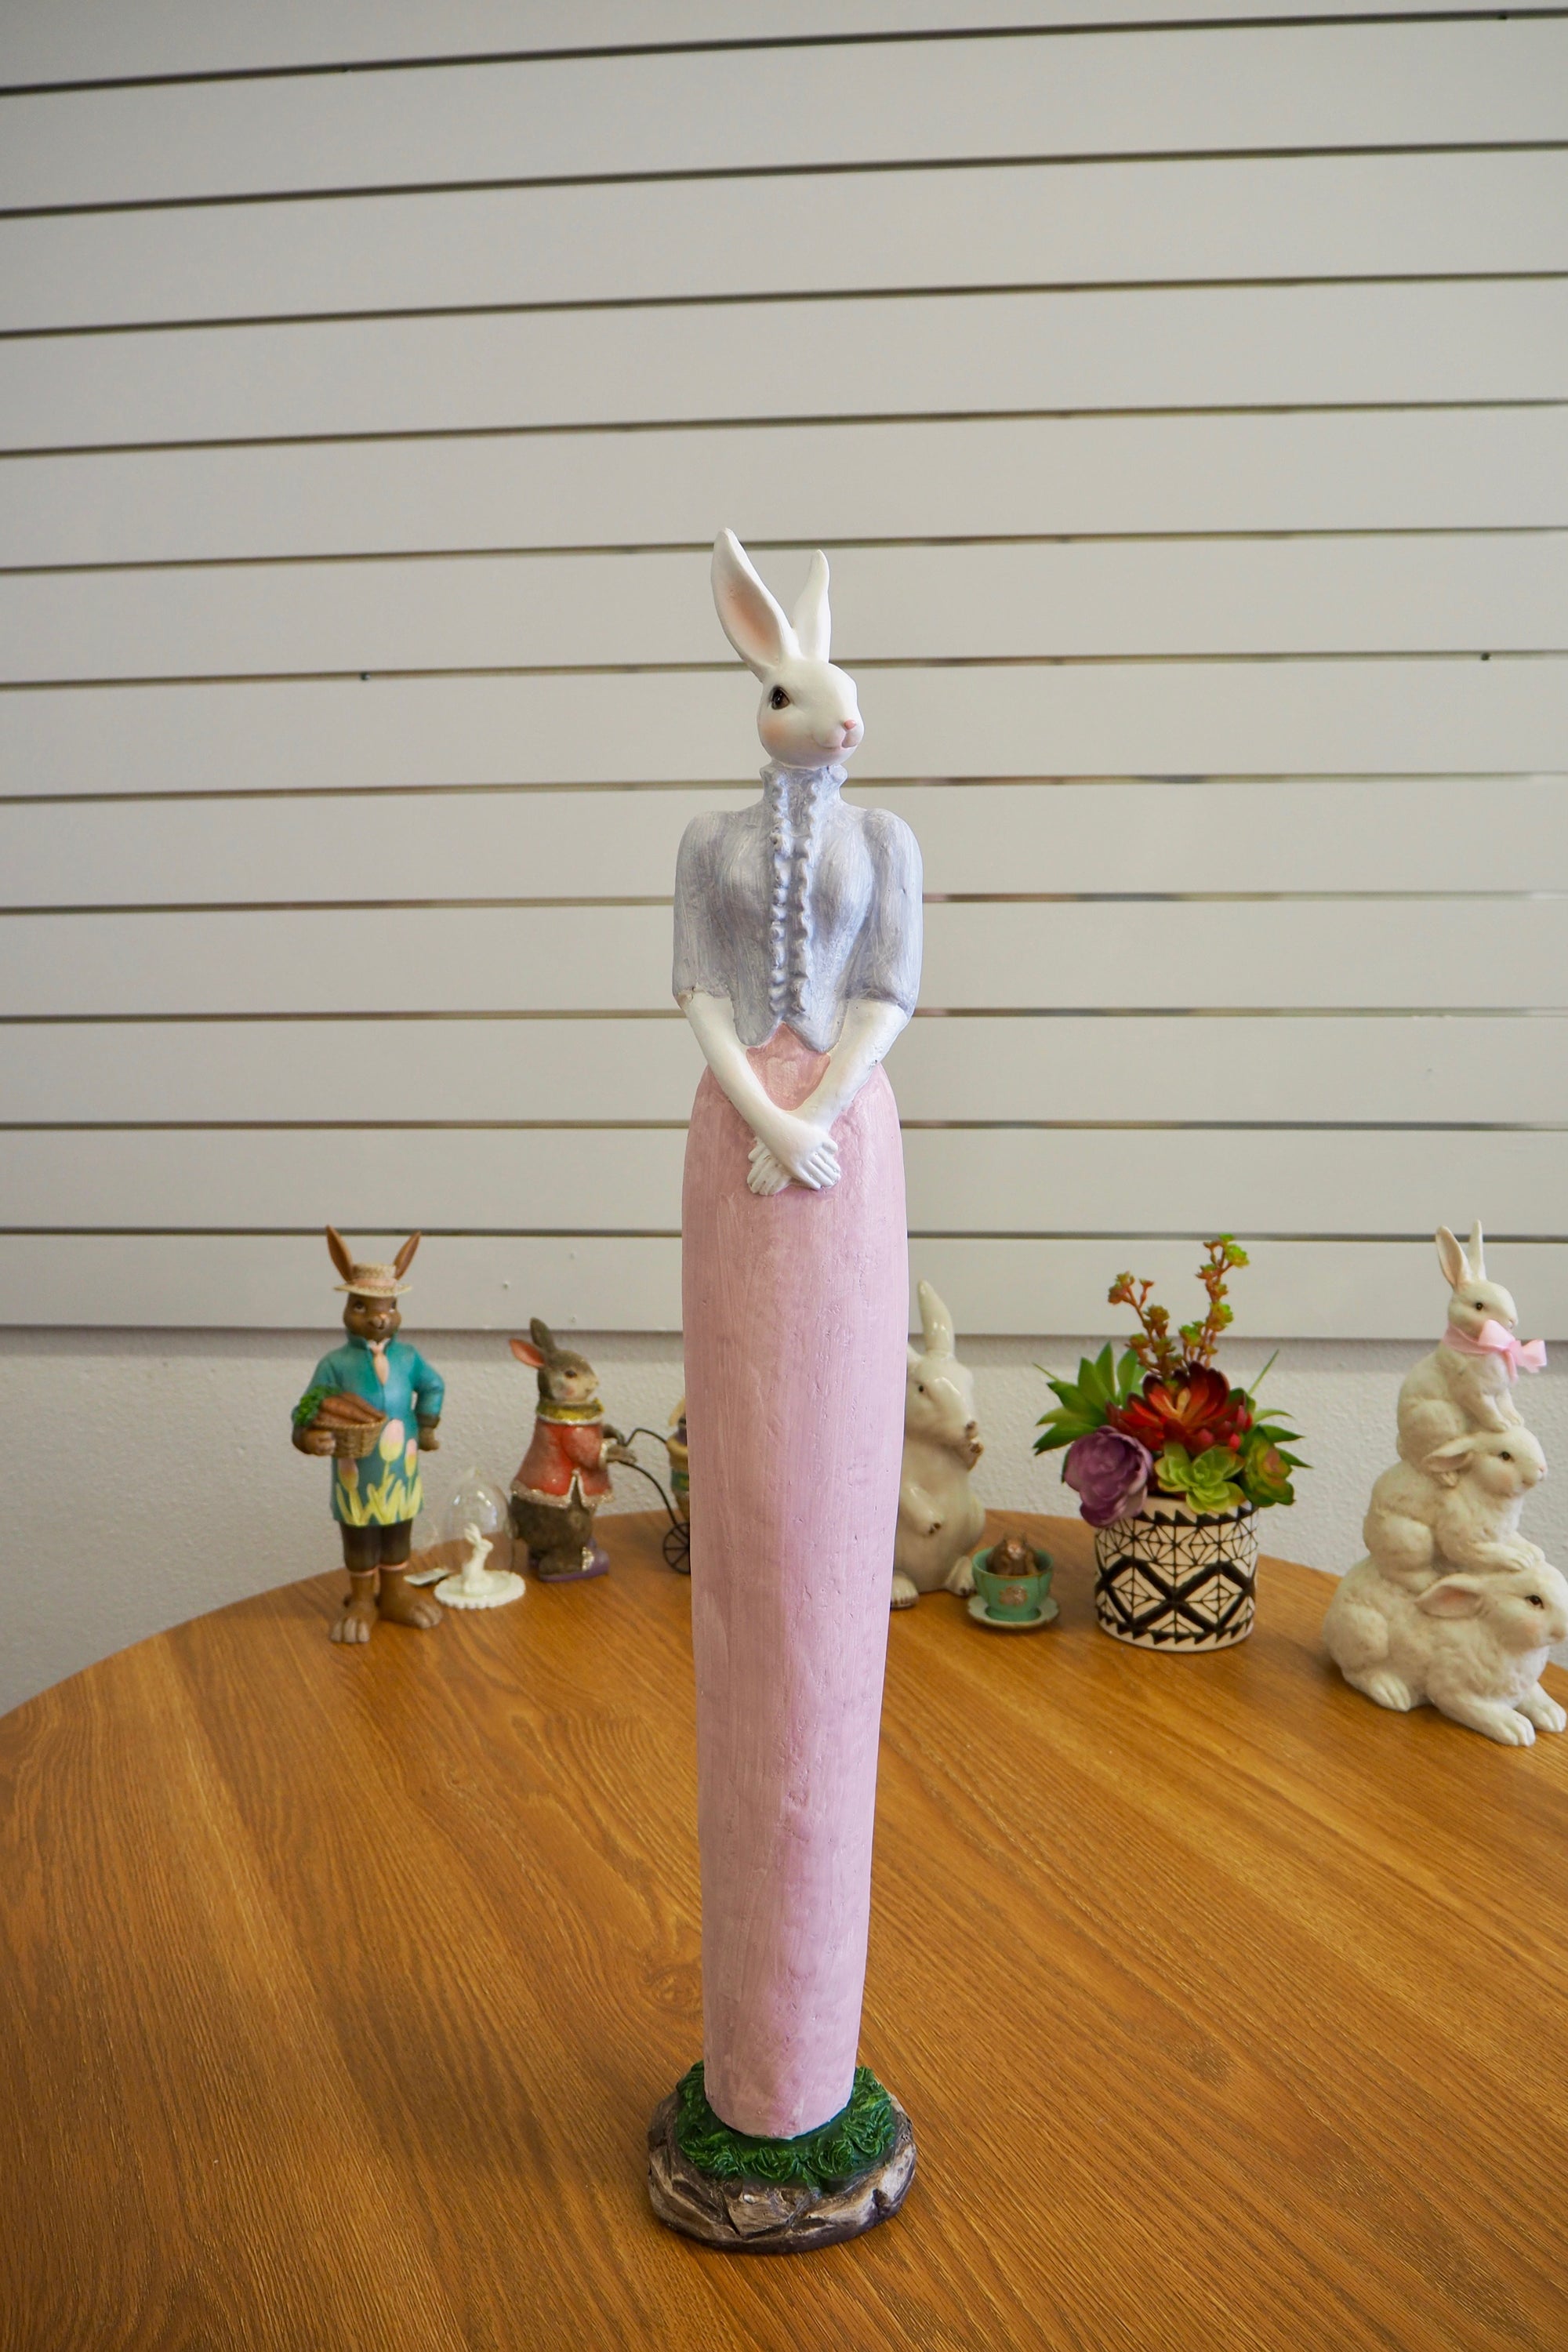   Easter Decorations - Lady White Rabbit